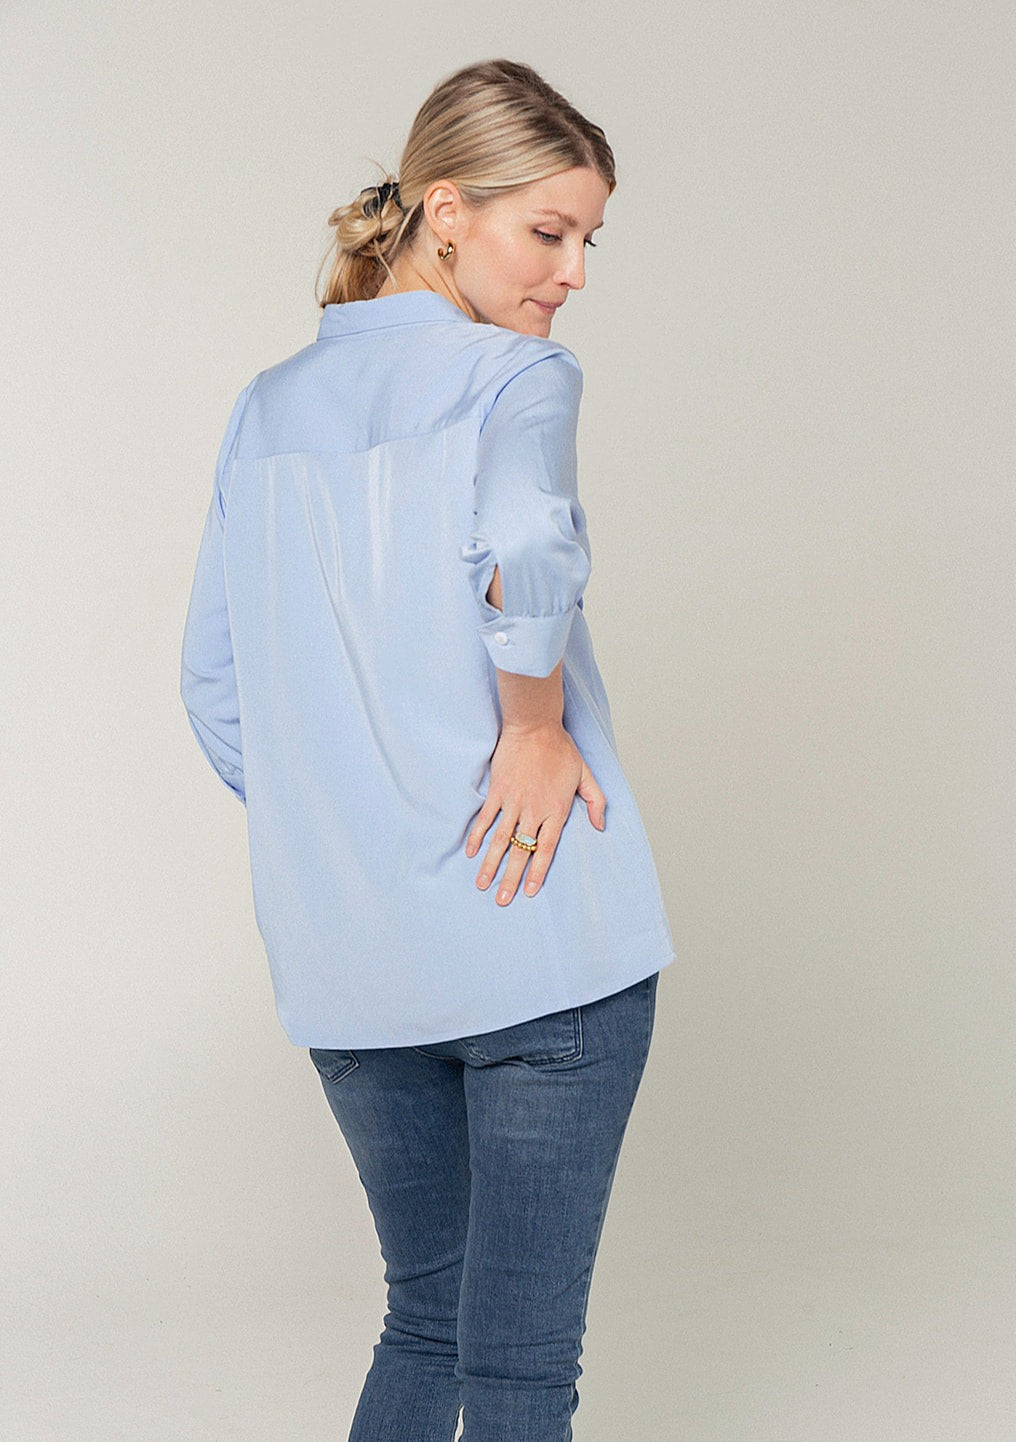 Maternity button down shirt. Maternity breastfeeding top. Pale blue sustainable TENCEL blouse.